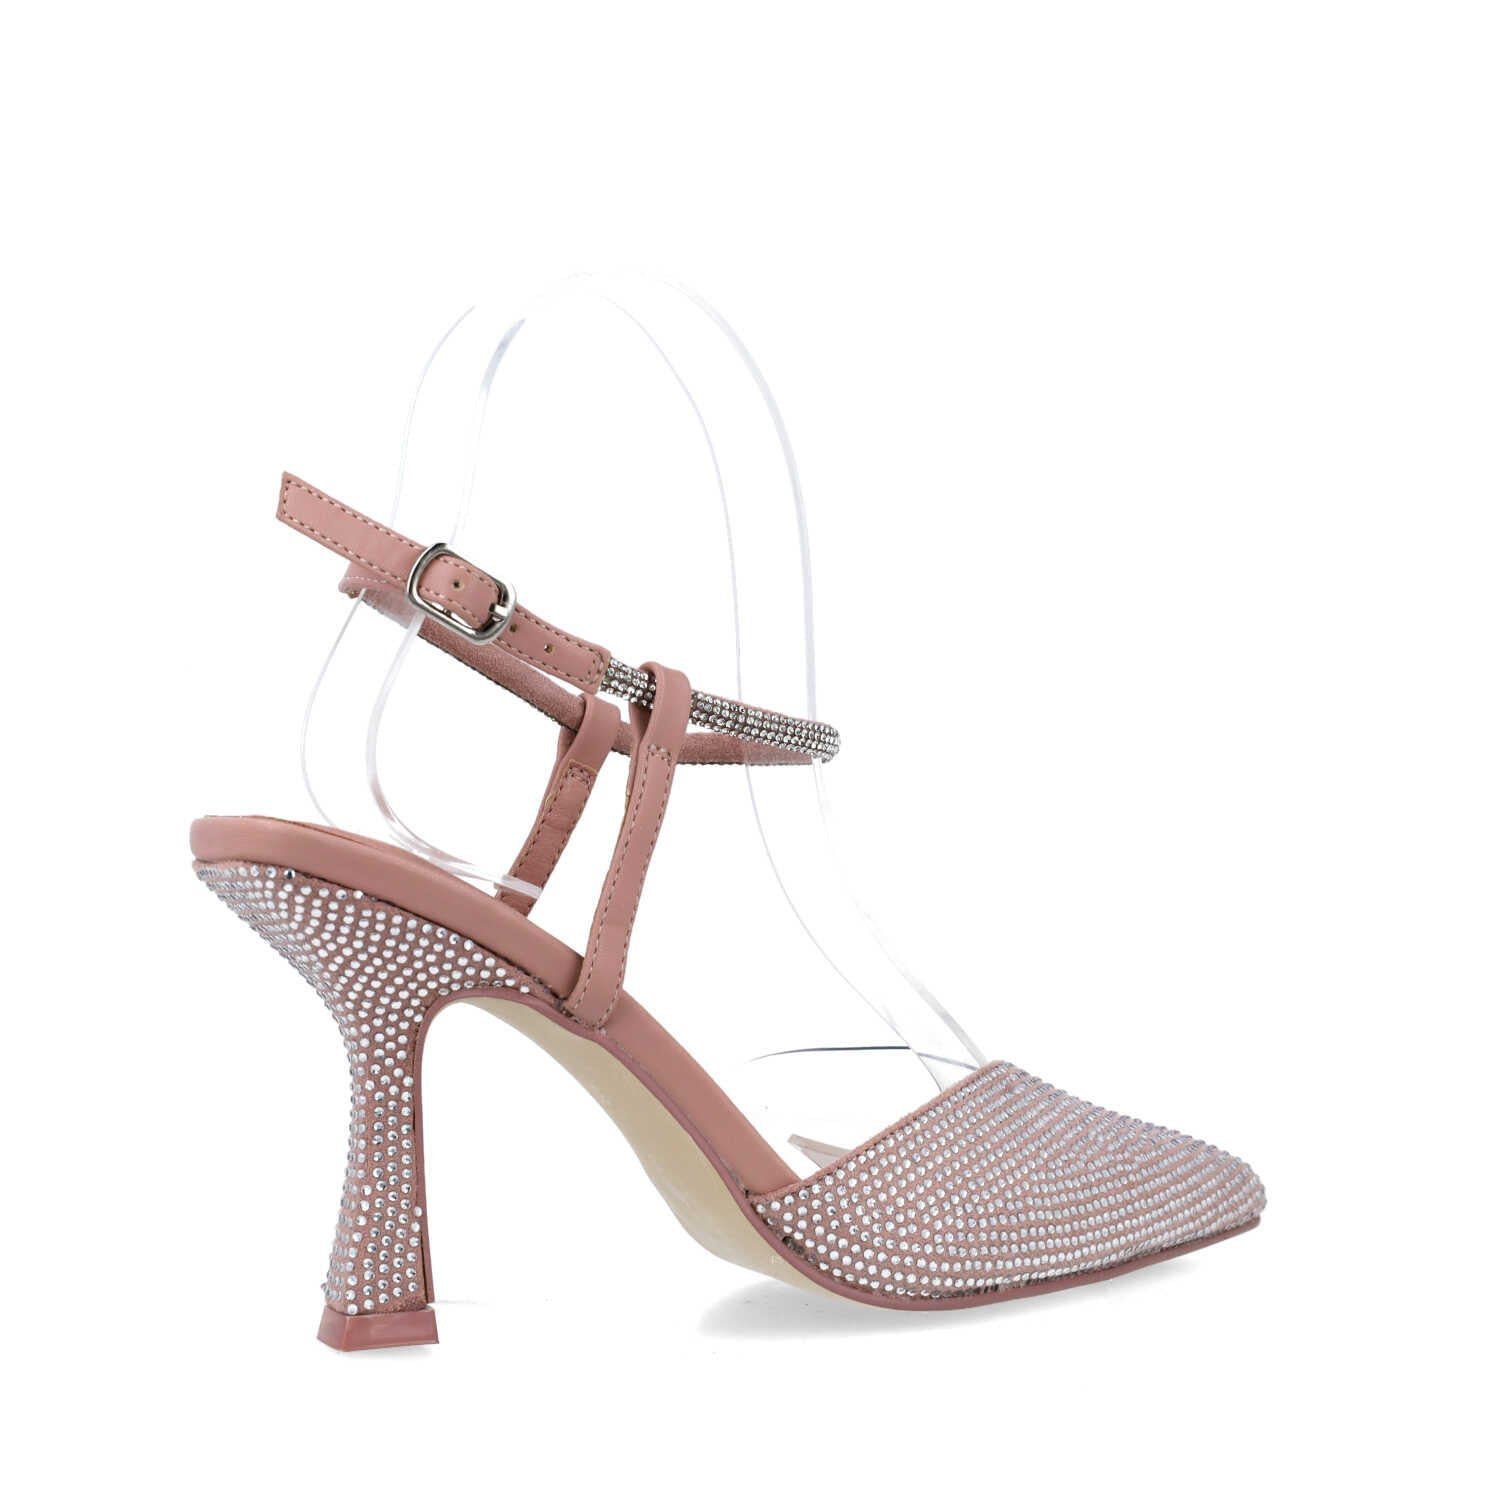 Nude Pumps With Ankle Strap_24738_97_03